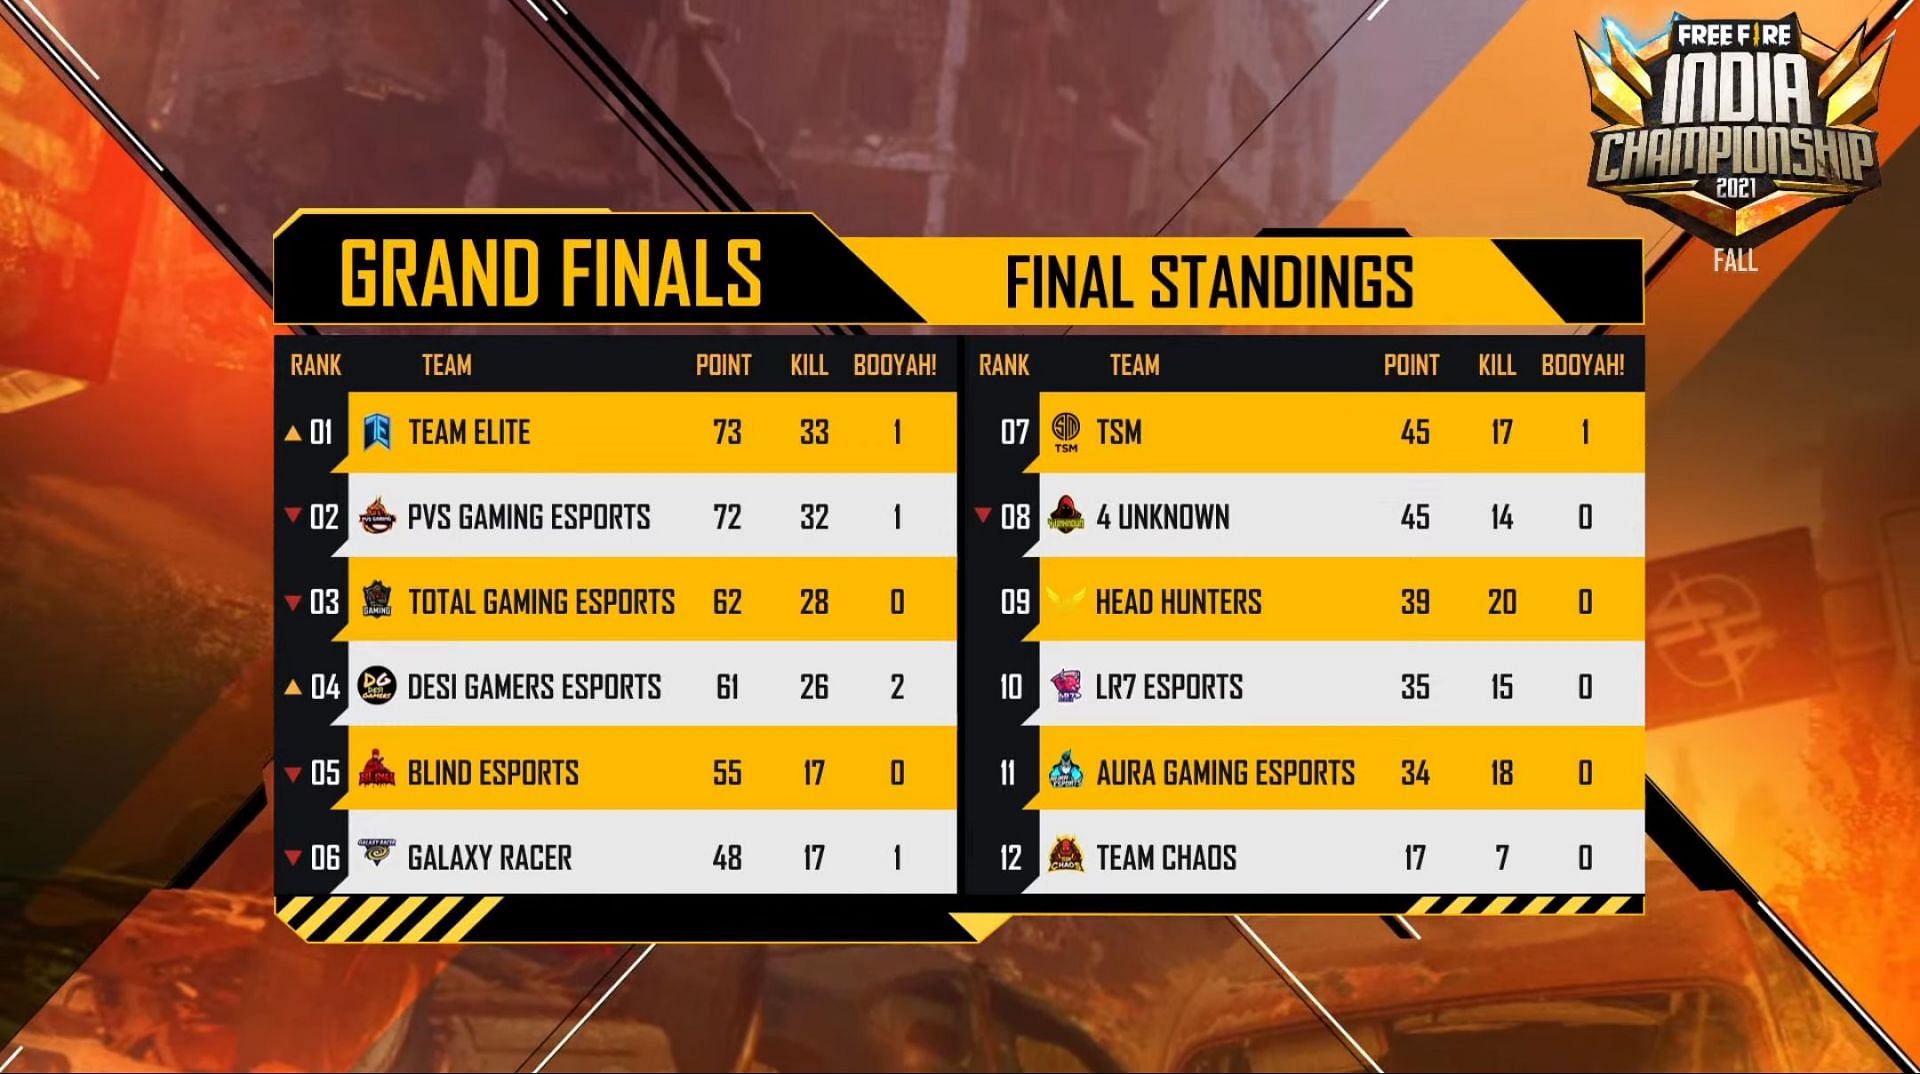 Free Fire India Championship 2021 Fall Grand Finals overall standings